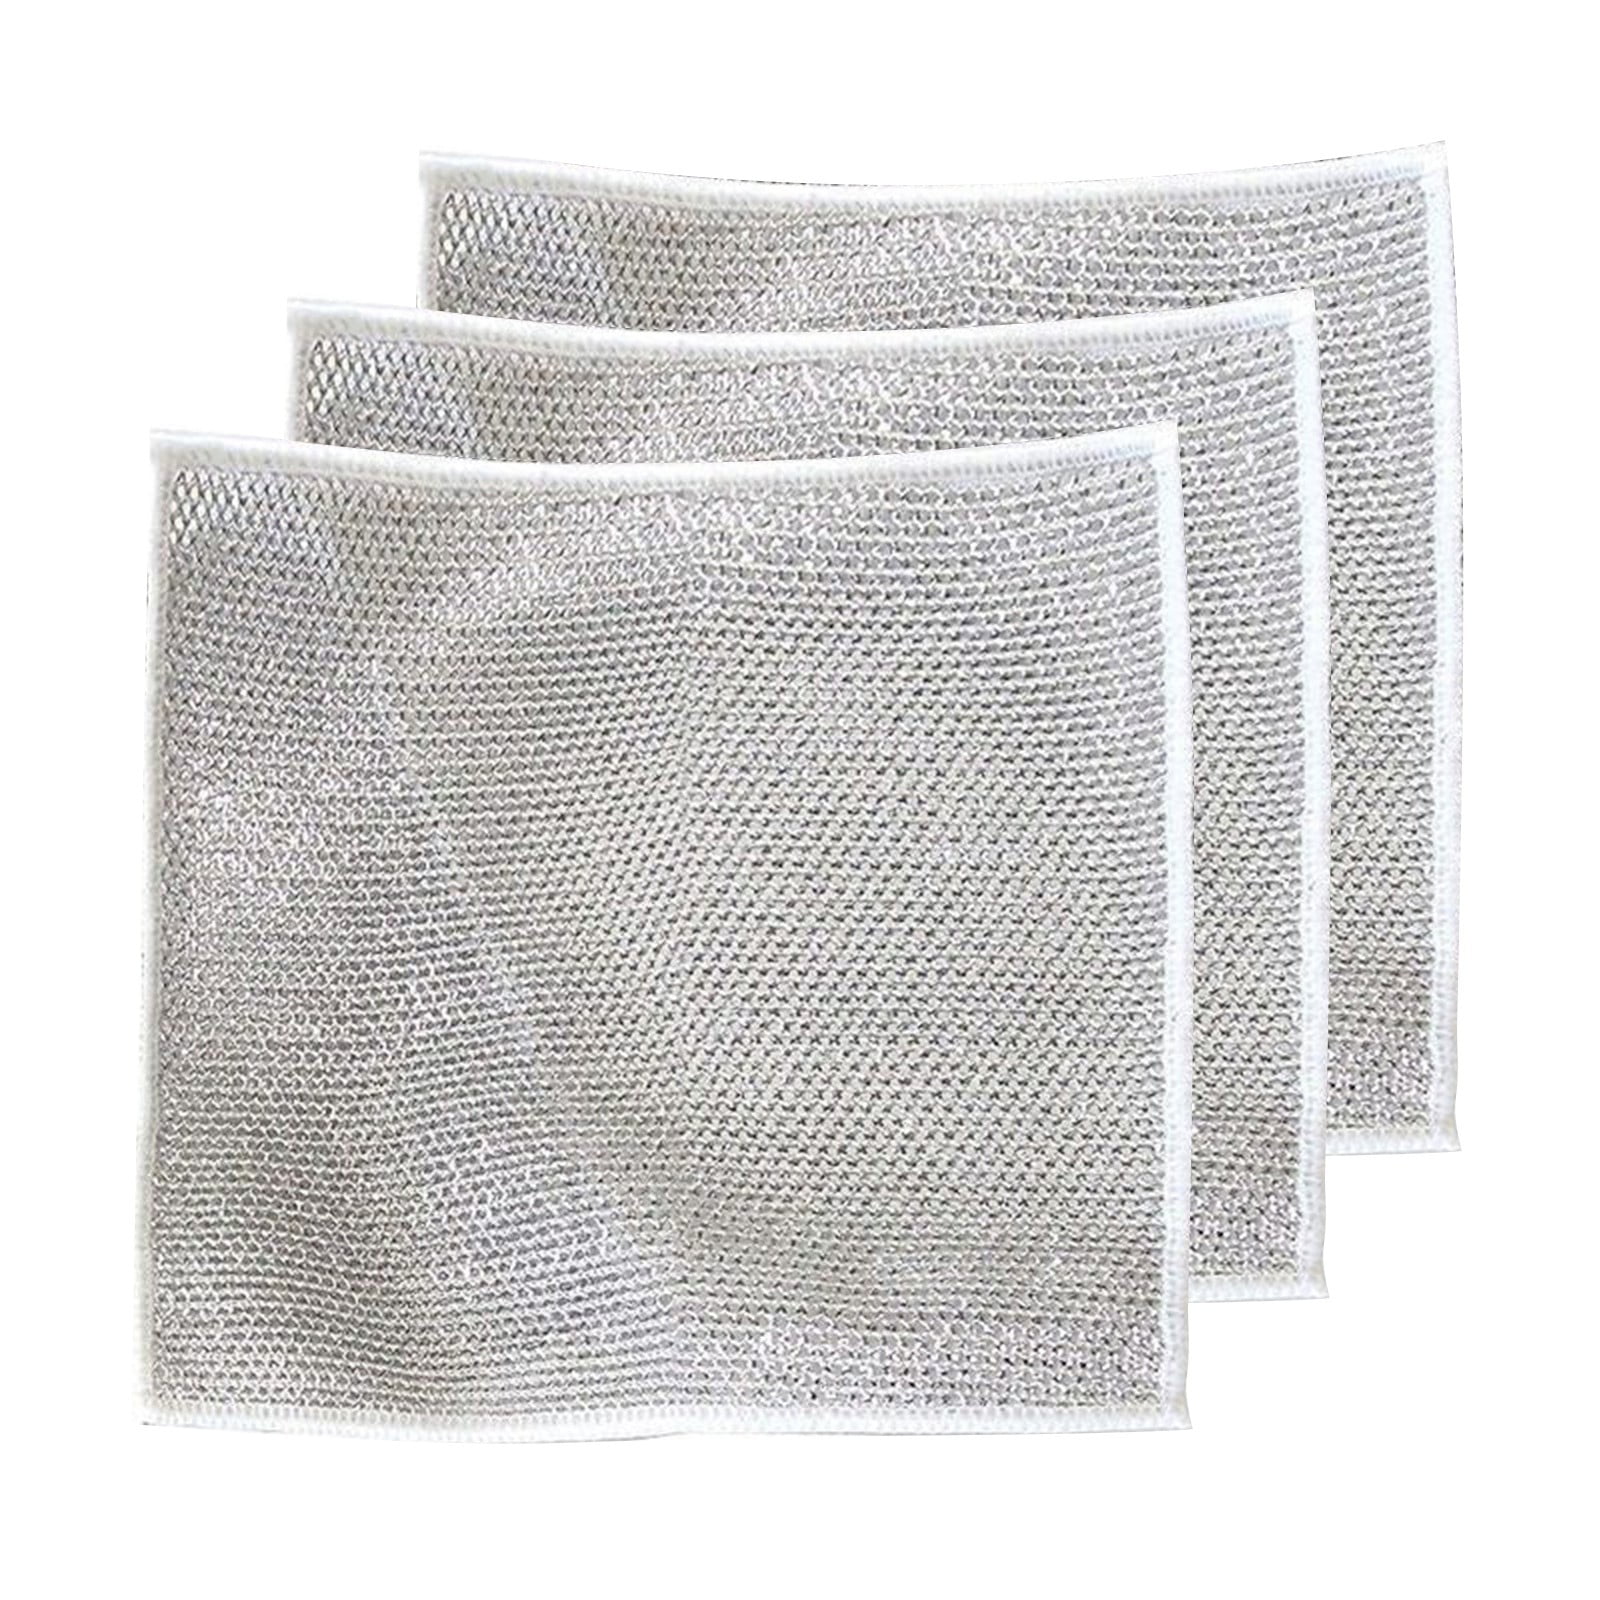 NURZIY 10PCS Multipurpose Double Layer Wire Dishwashing Rags for Wet and  Dry, Home Kitchen Cooktop Grid Cleaning Cloth